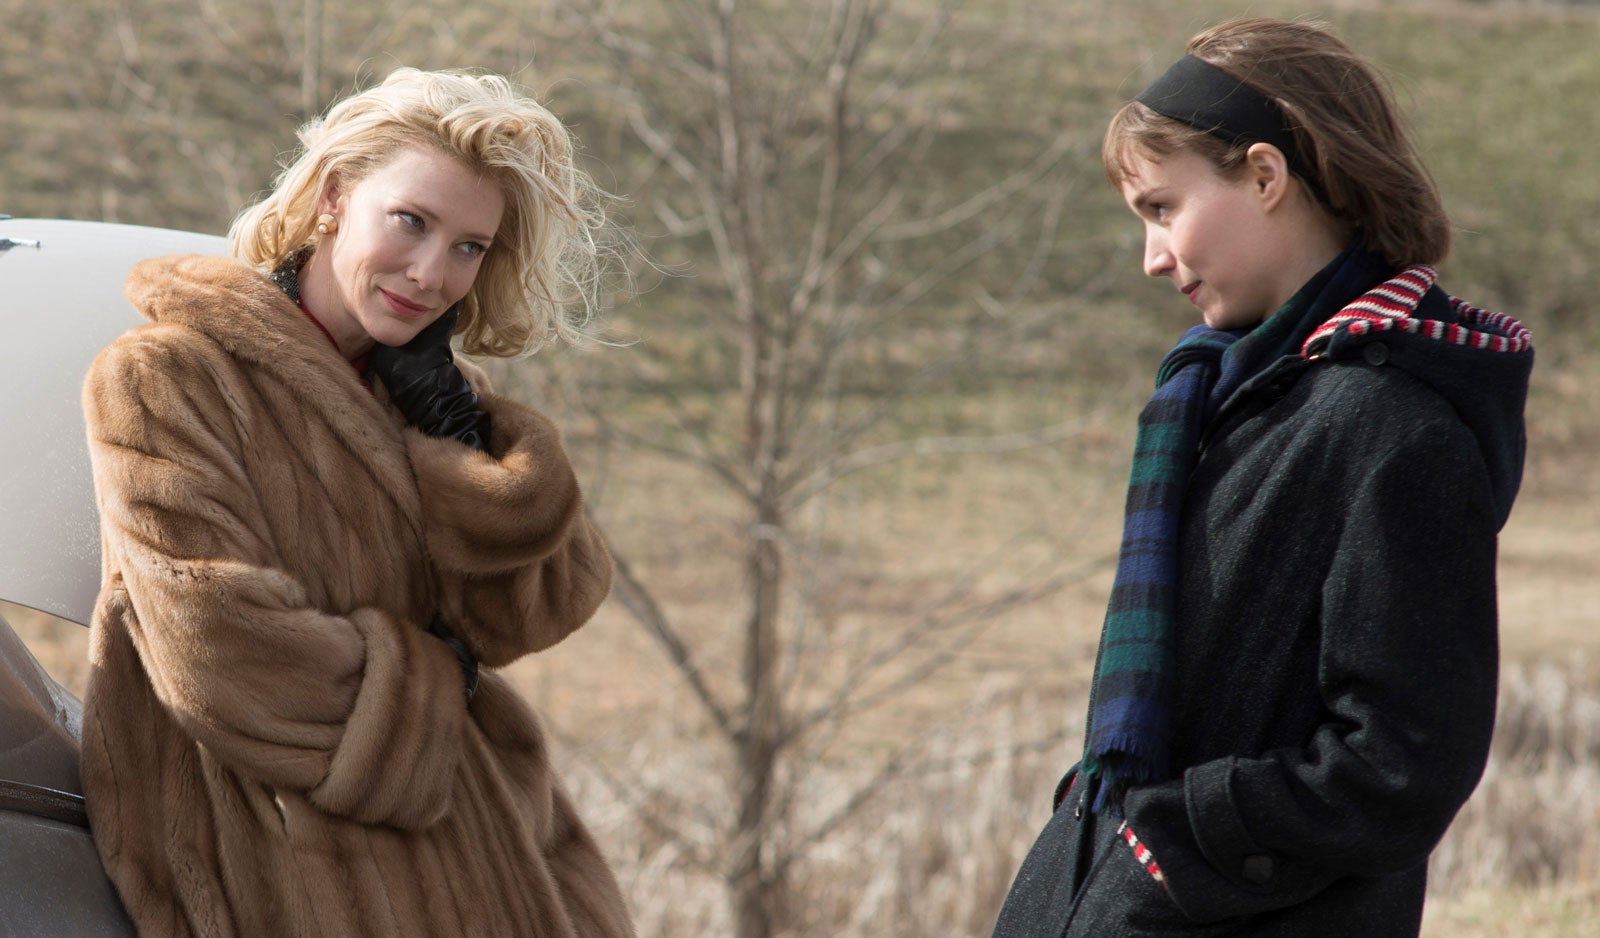 Cate Blanchett and Rooney Mara as Carol and Therese in Carol